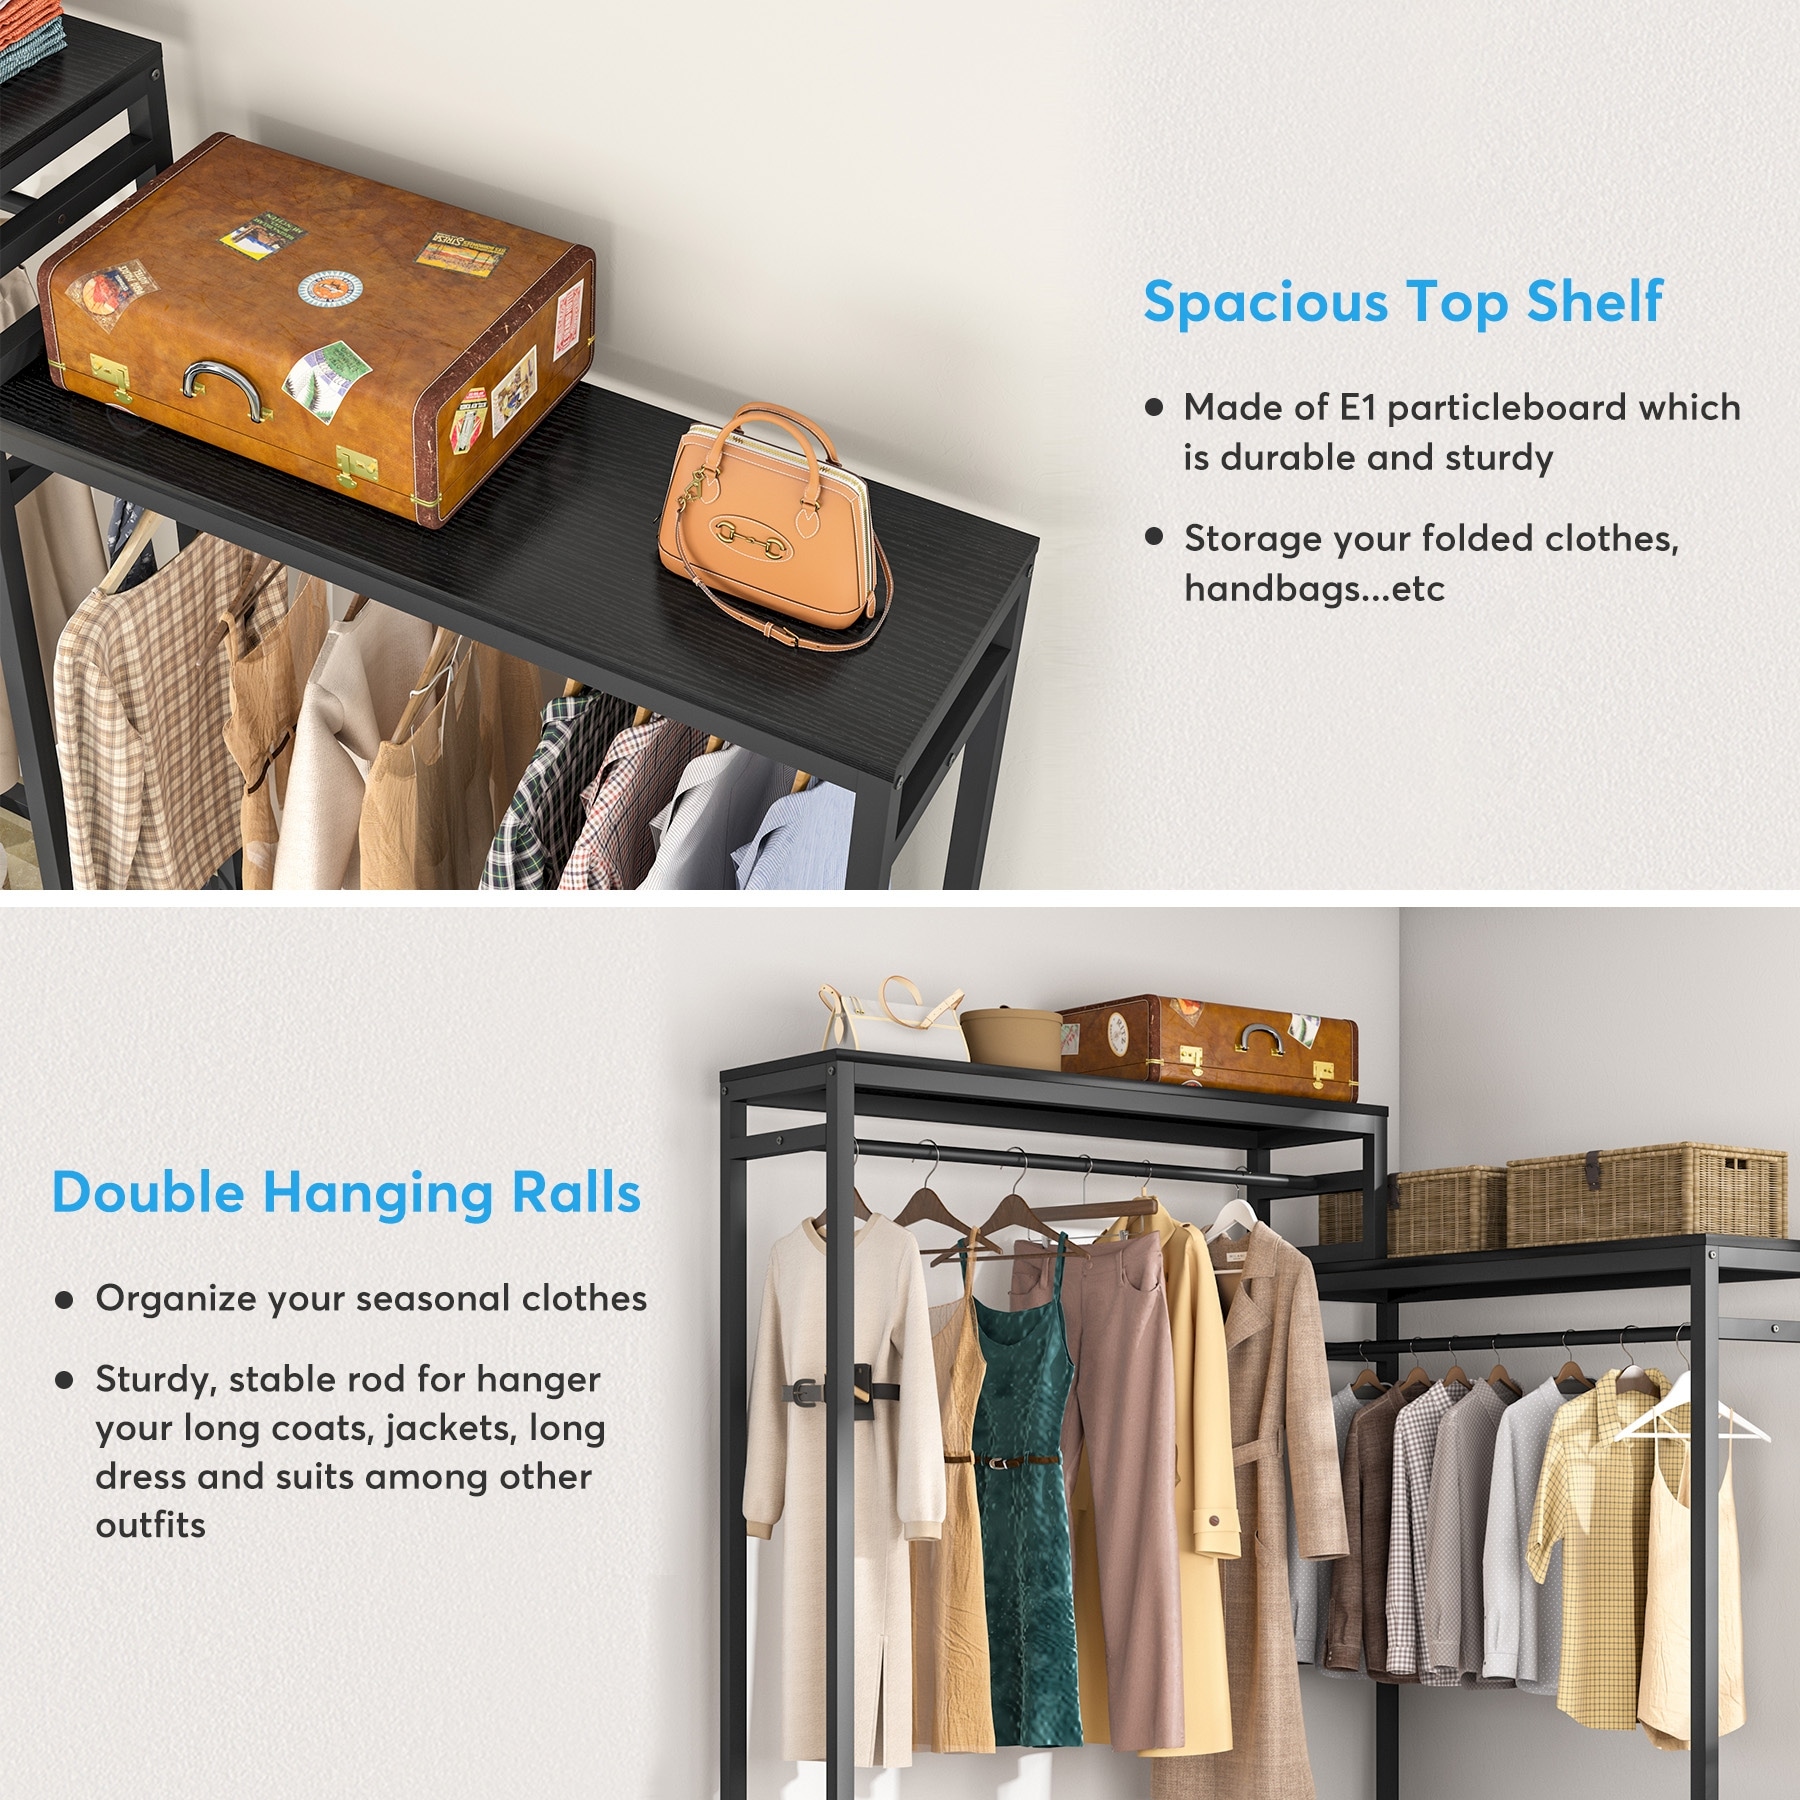 https://ak1.ostkcdn.com/images/products/is/images/direct/71266f0a111831f23b37ba894179bddeded411aa/Heavy-Duty-Metal-Clothes-Garment-Racks-with-Storage-Shelves-and-Double-Hanging-Rod%2CFree-Standing-Closet-Organizer.jpg